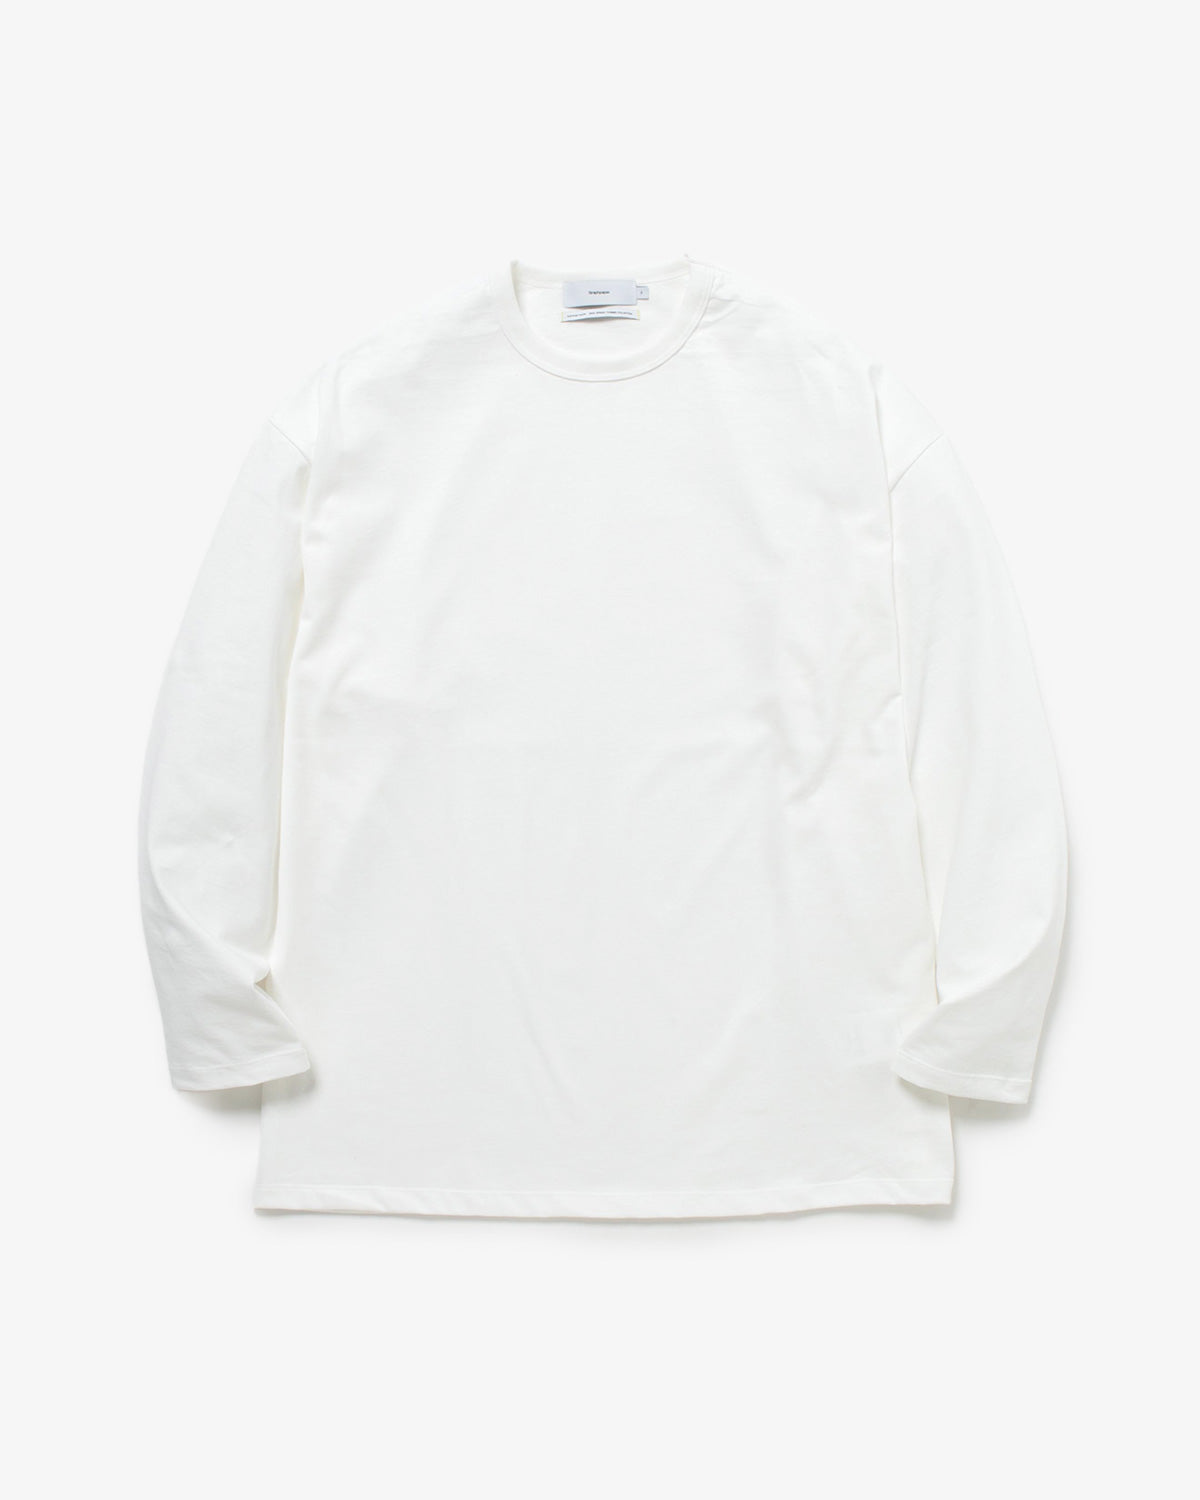 RECYCLED COTTON JERSEY L/S TEE